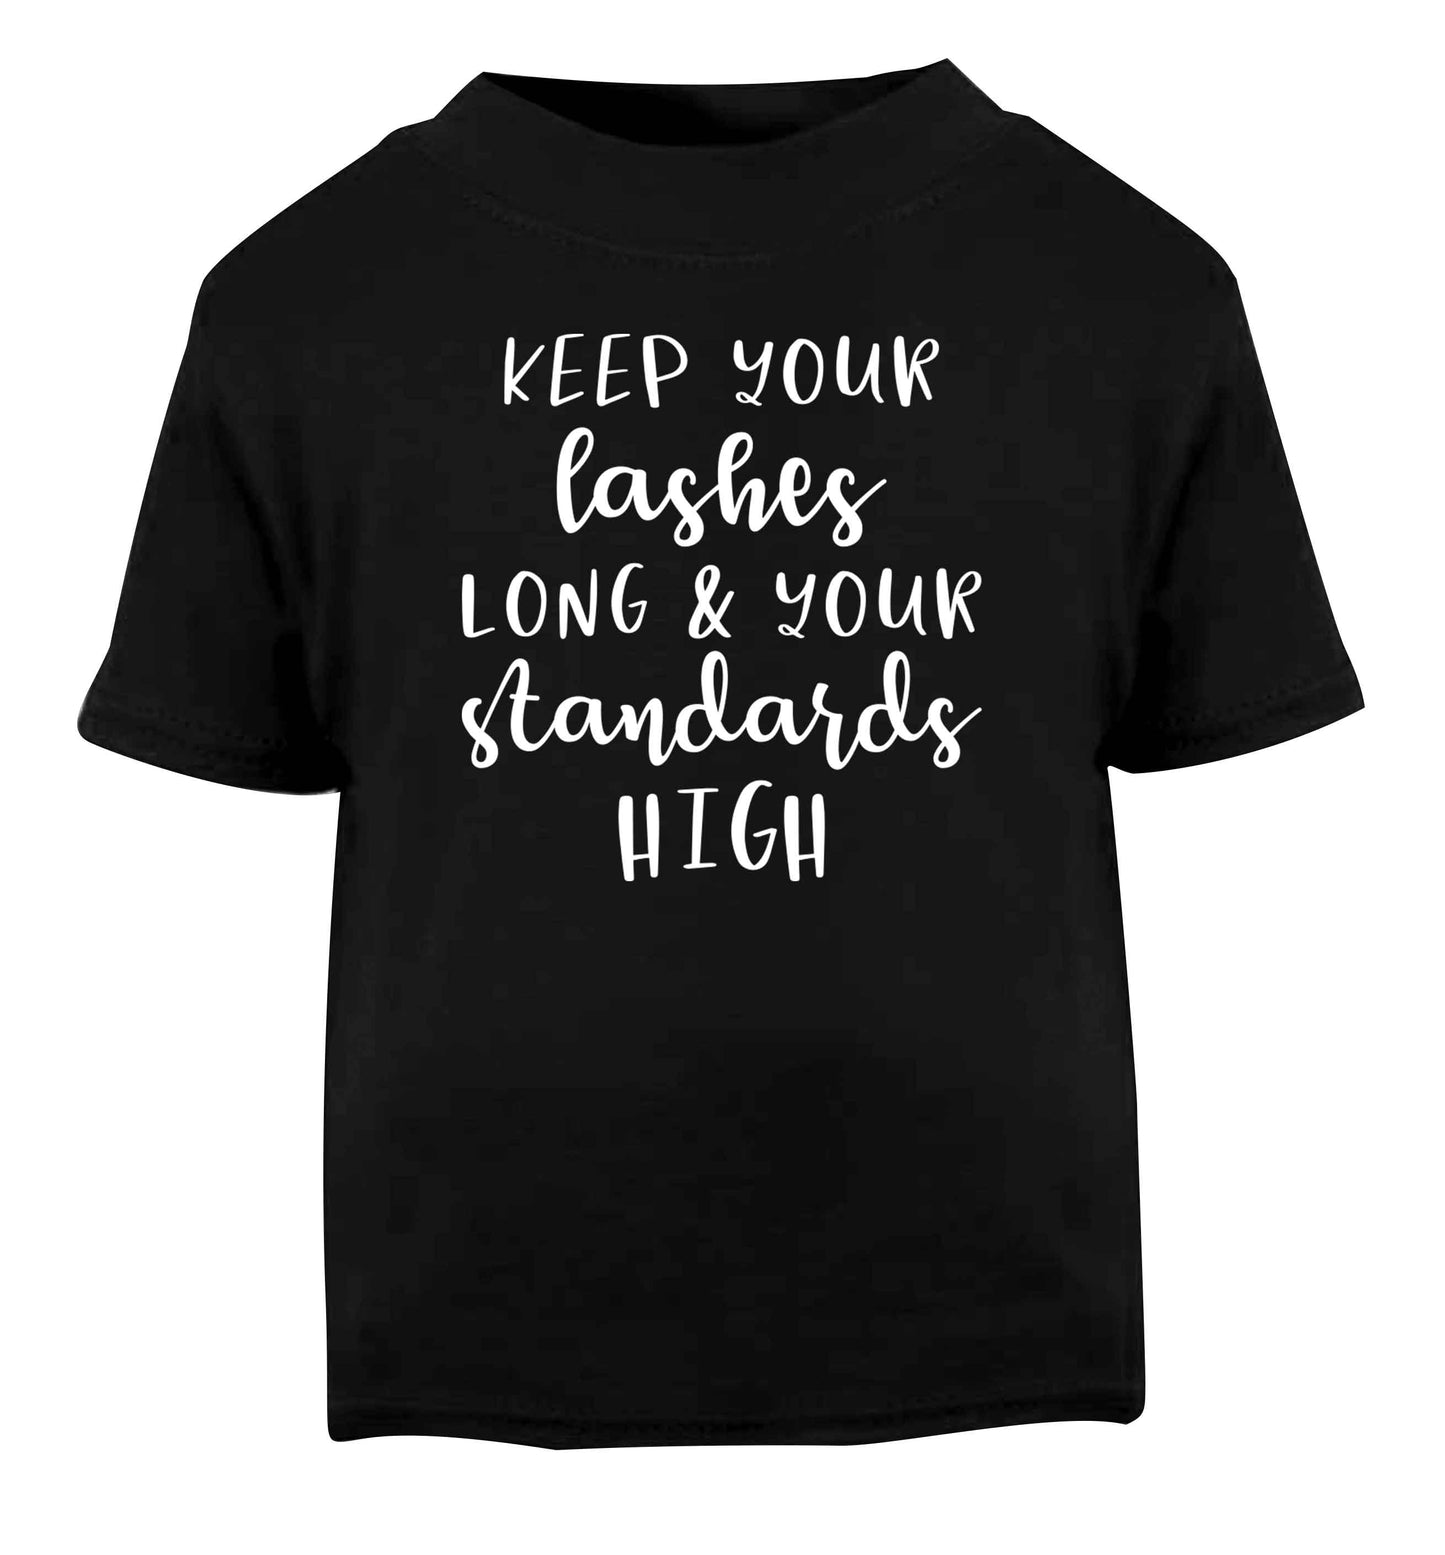 Keep your lashes long and your standards high Black Baby Toddler Tshirt 2 years